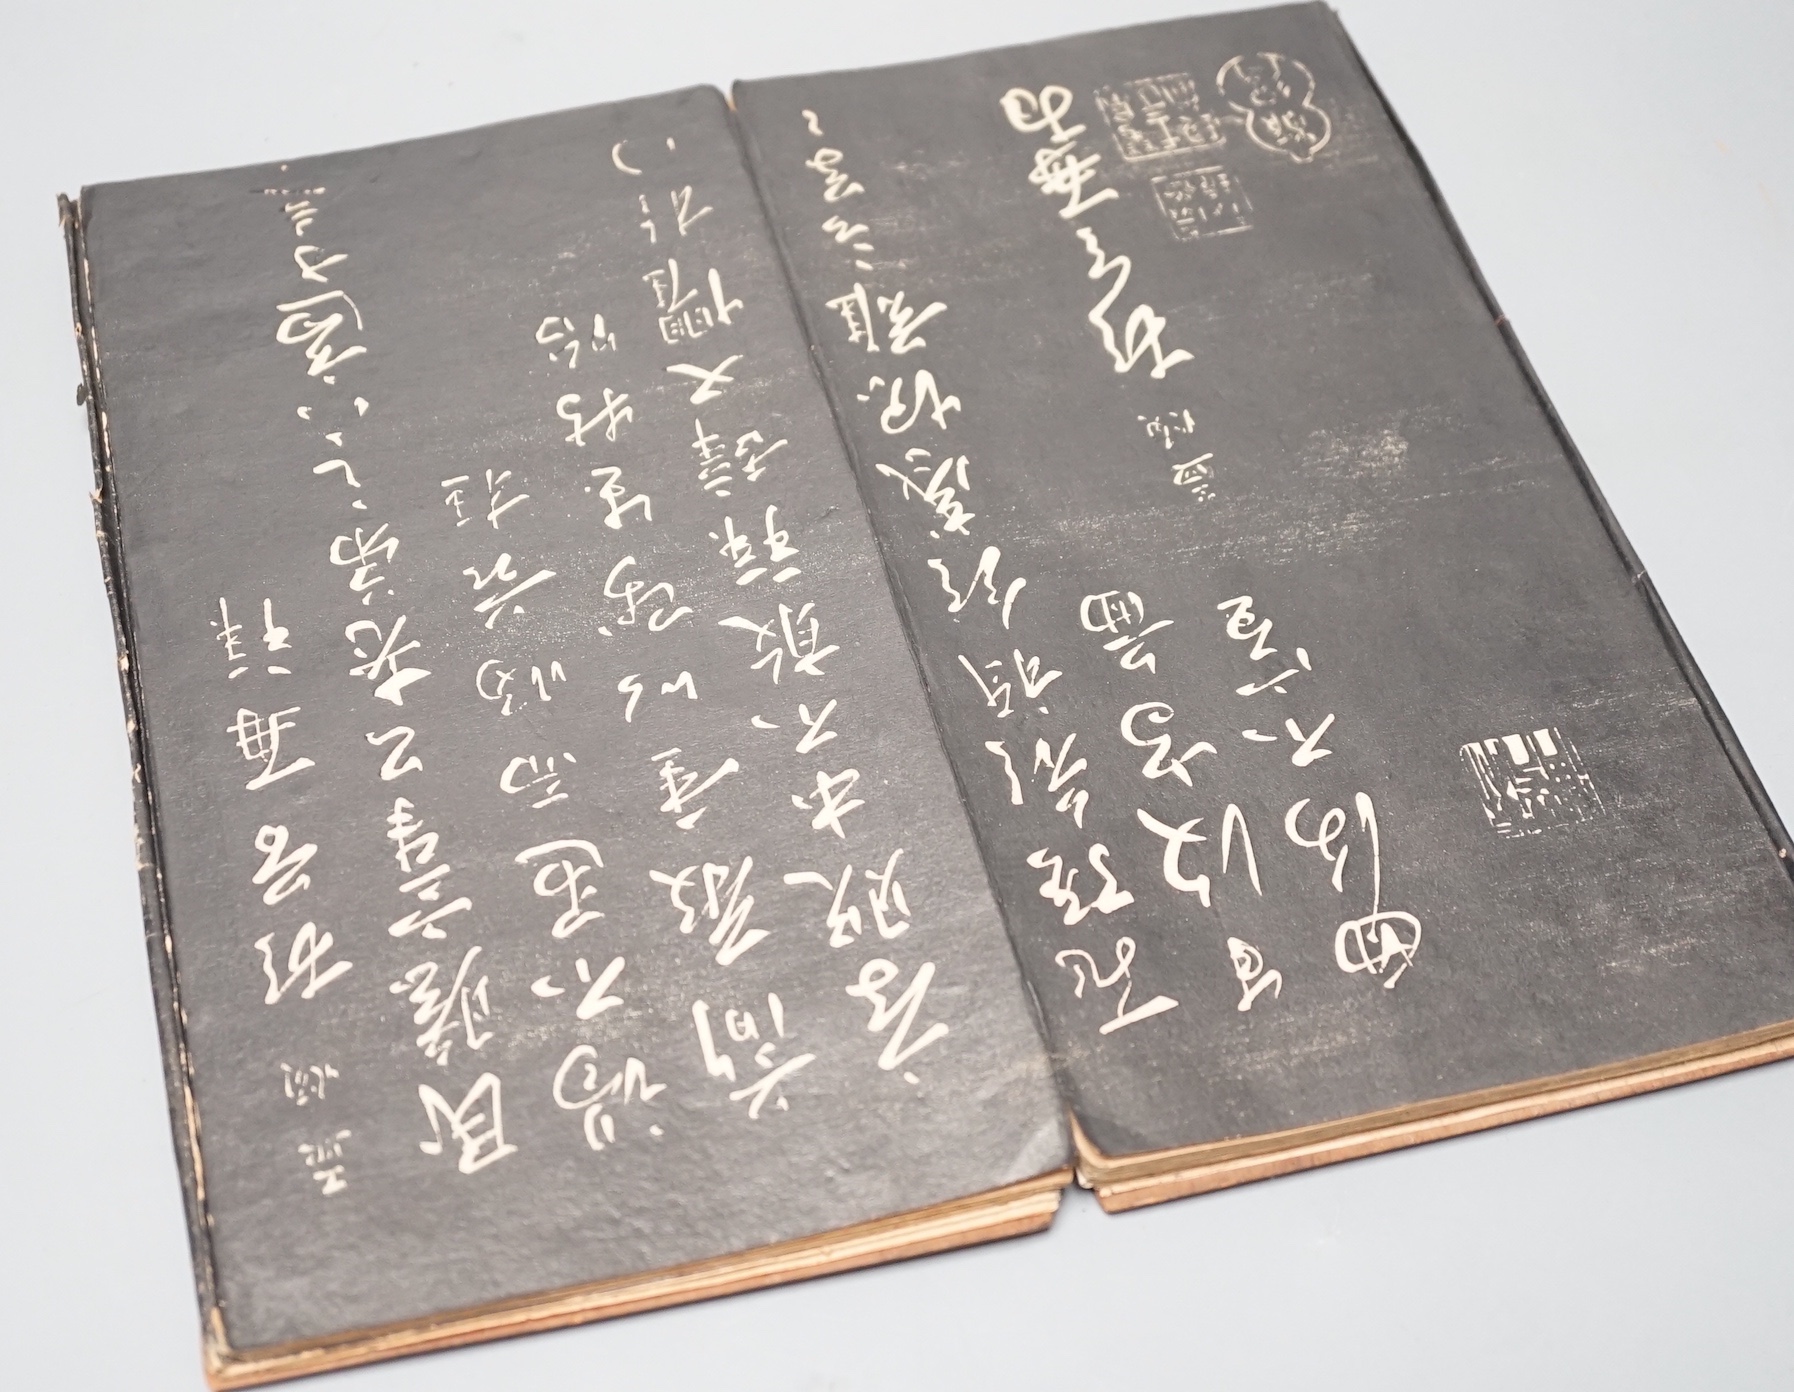 An early 20th century Chinese calligraphy rubbing concertina book